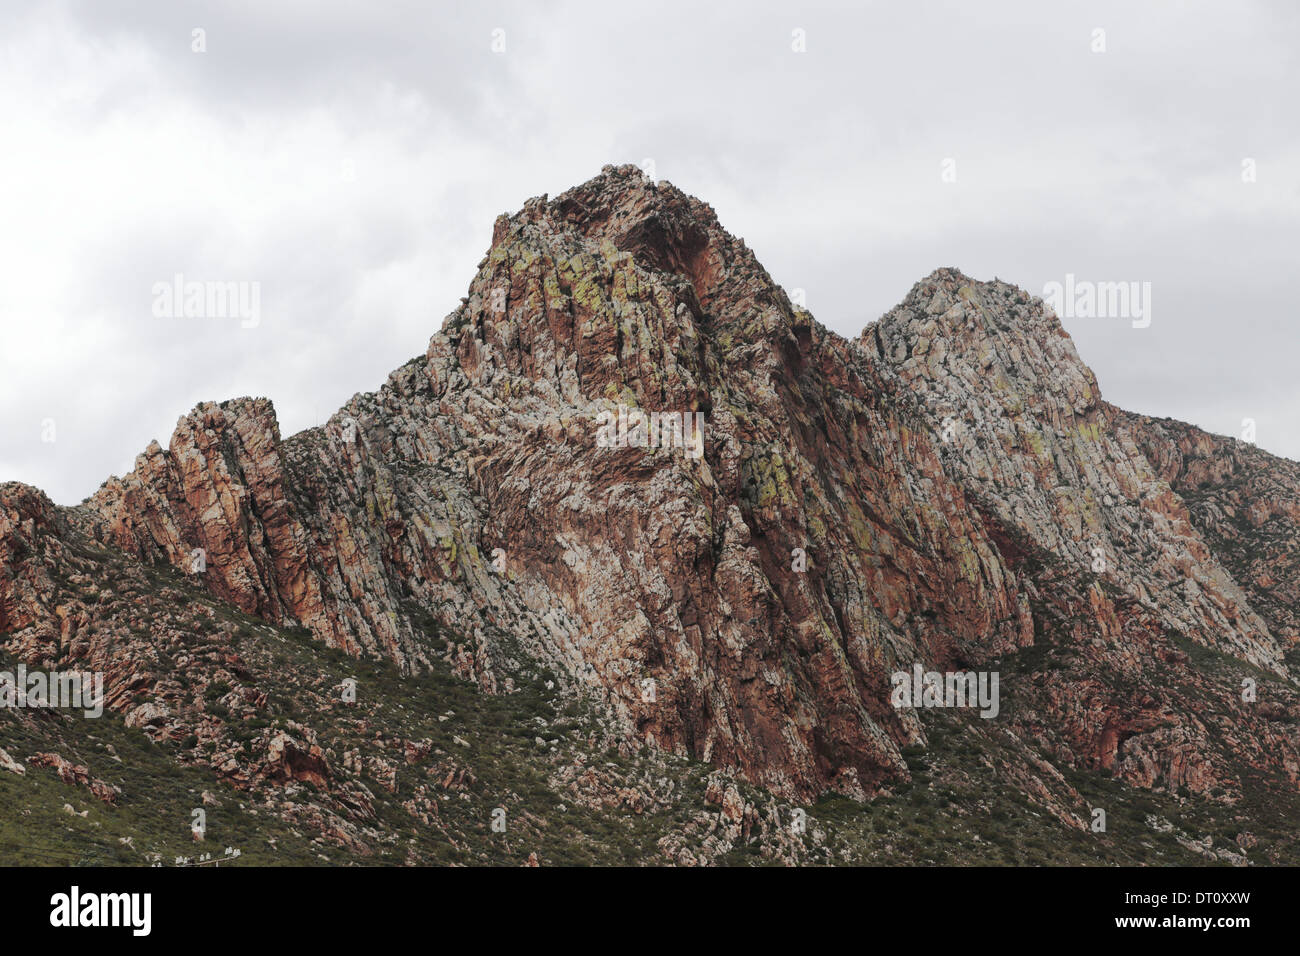 Jagged mountain peak in the Cogman's Kloof area, Montagu, South Africa Stock Photo